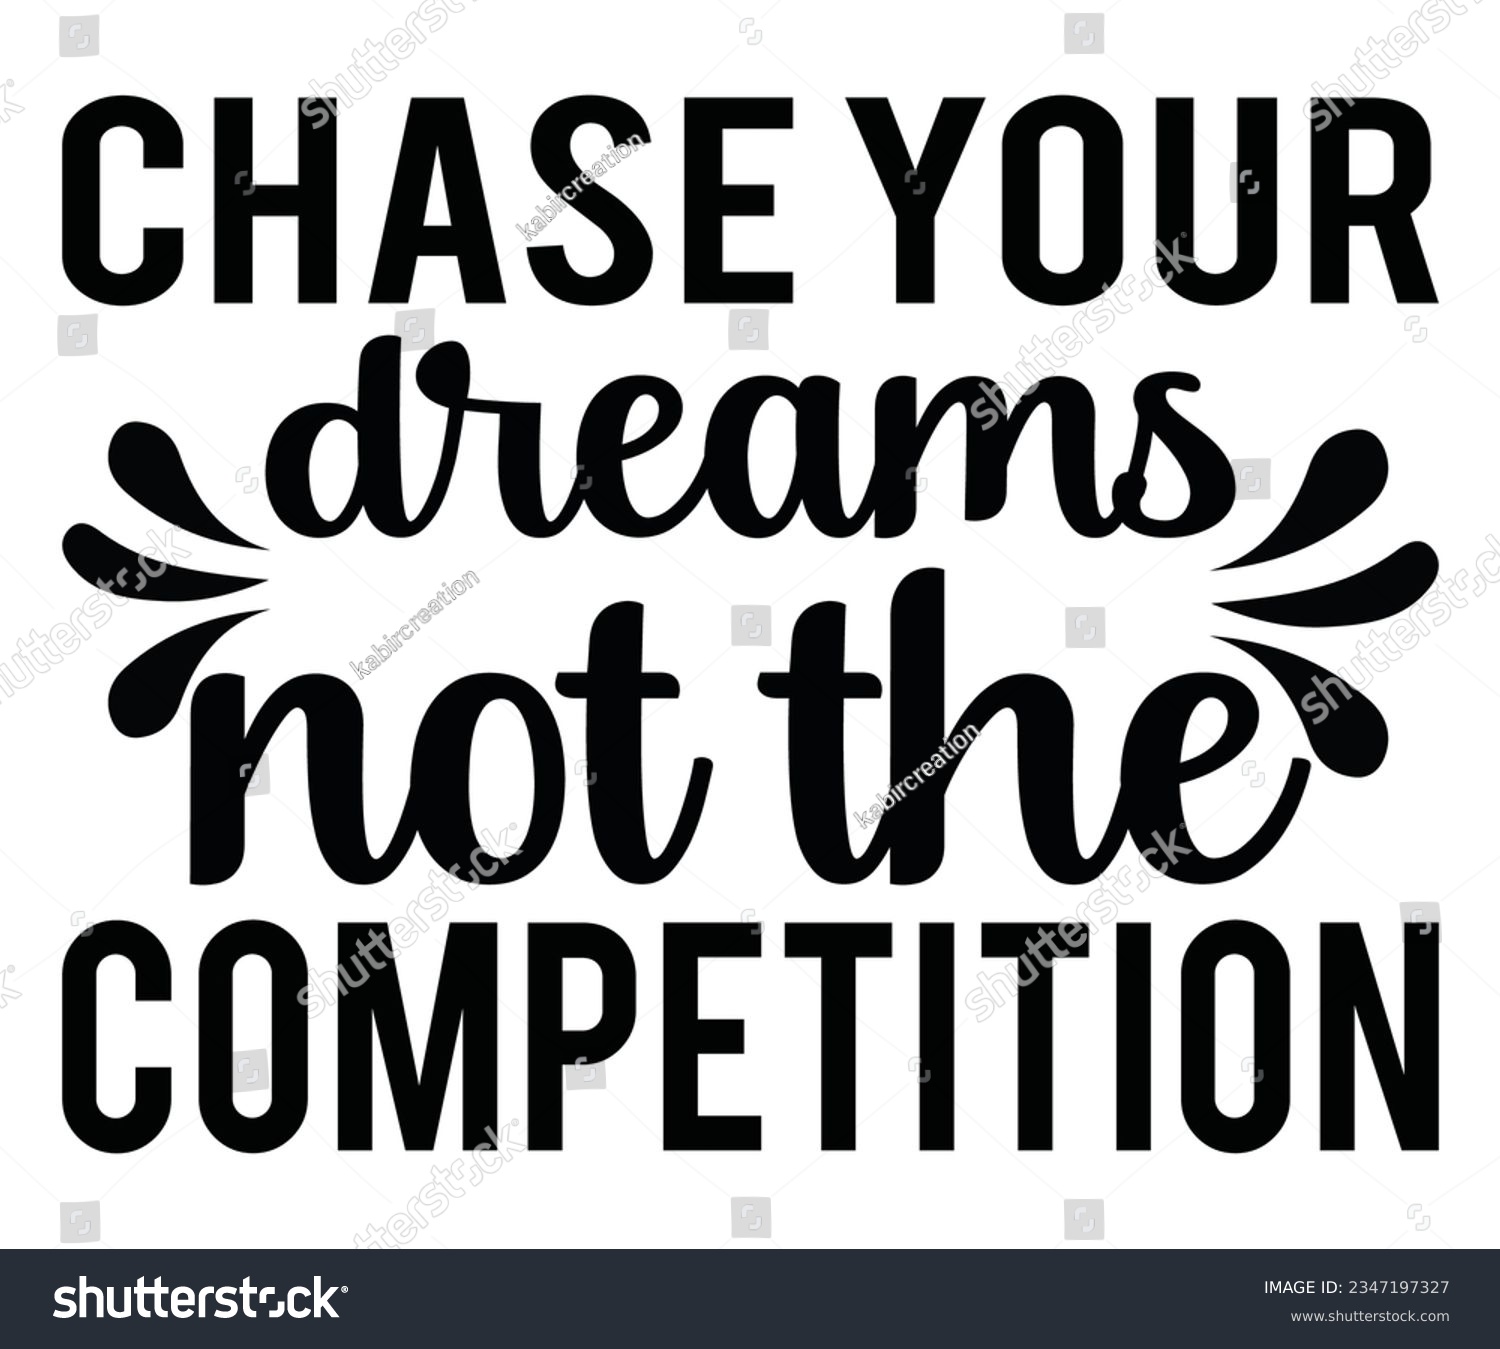 SVG of  Chase your dreams, not the competition svg, Chase your svg, dreams svg competition svg svg